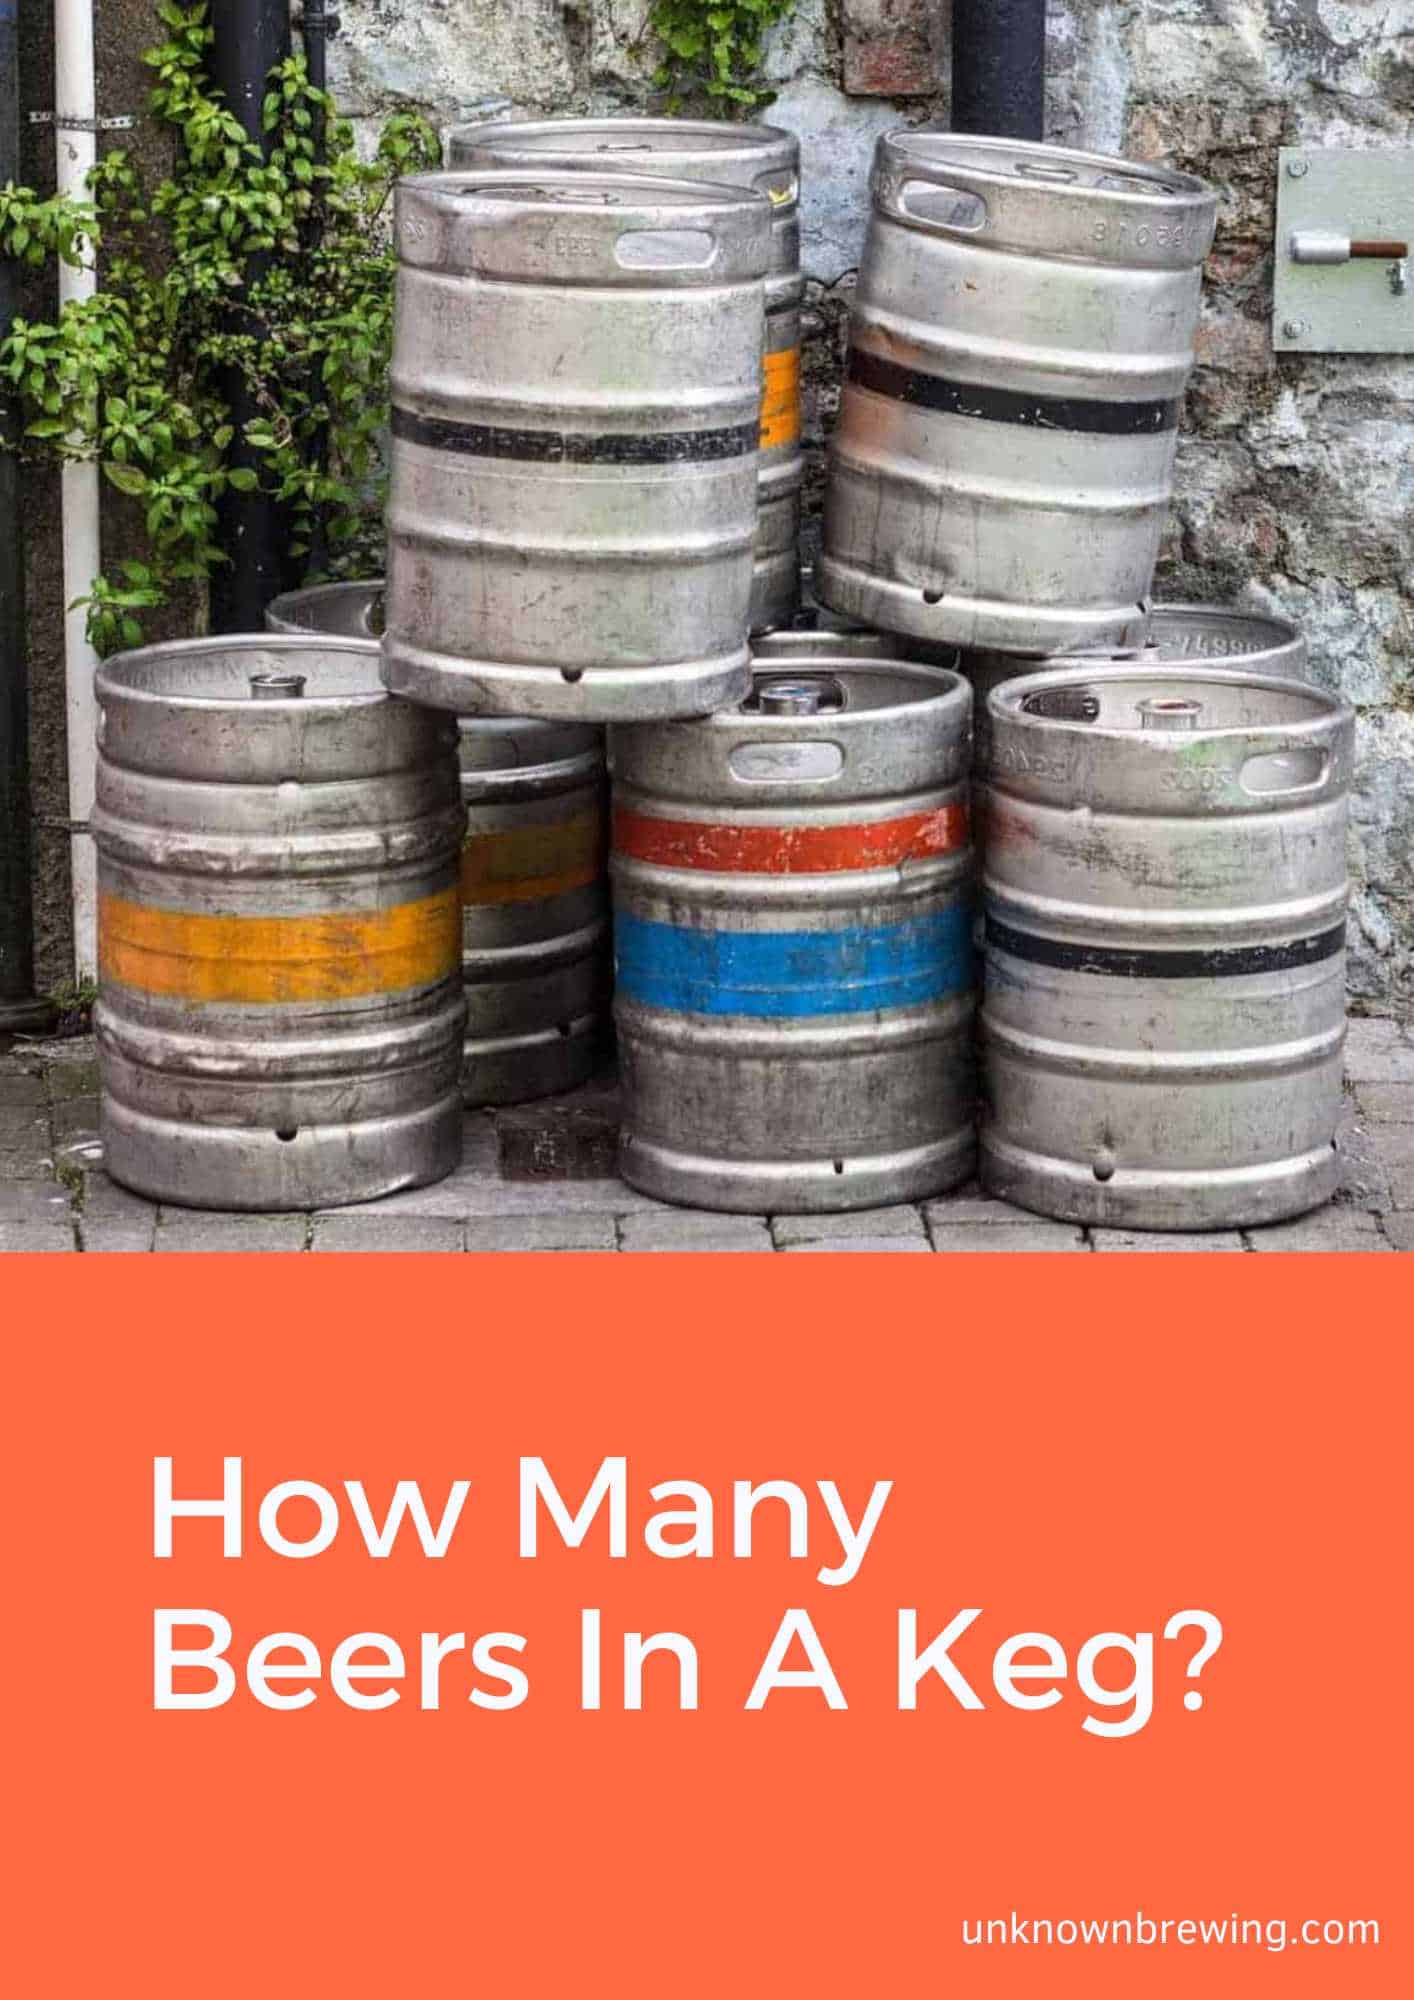 How Many Beers In A Keg